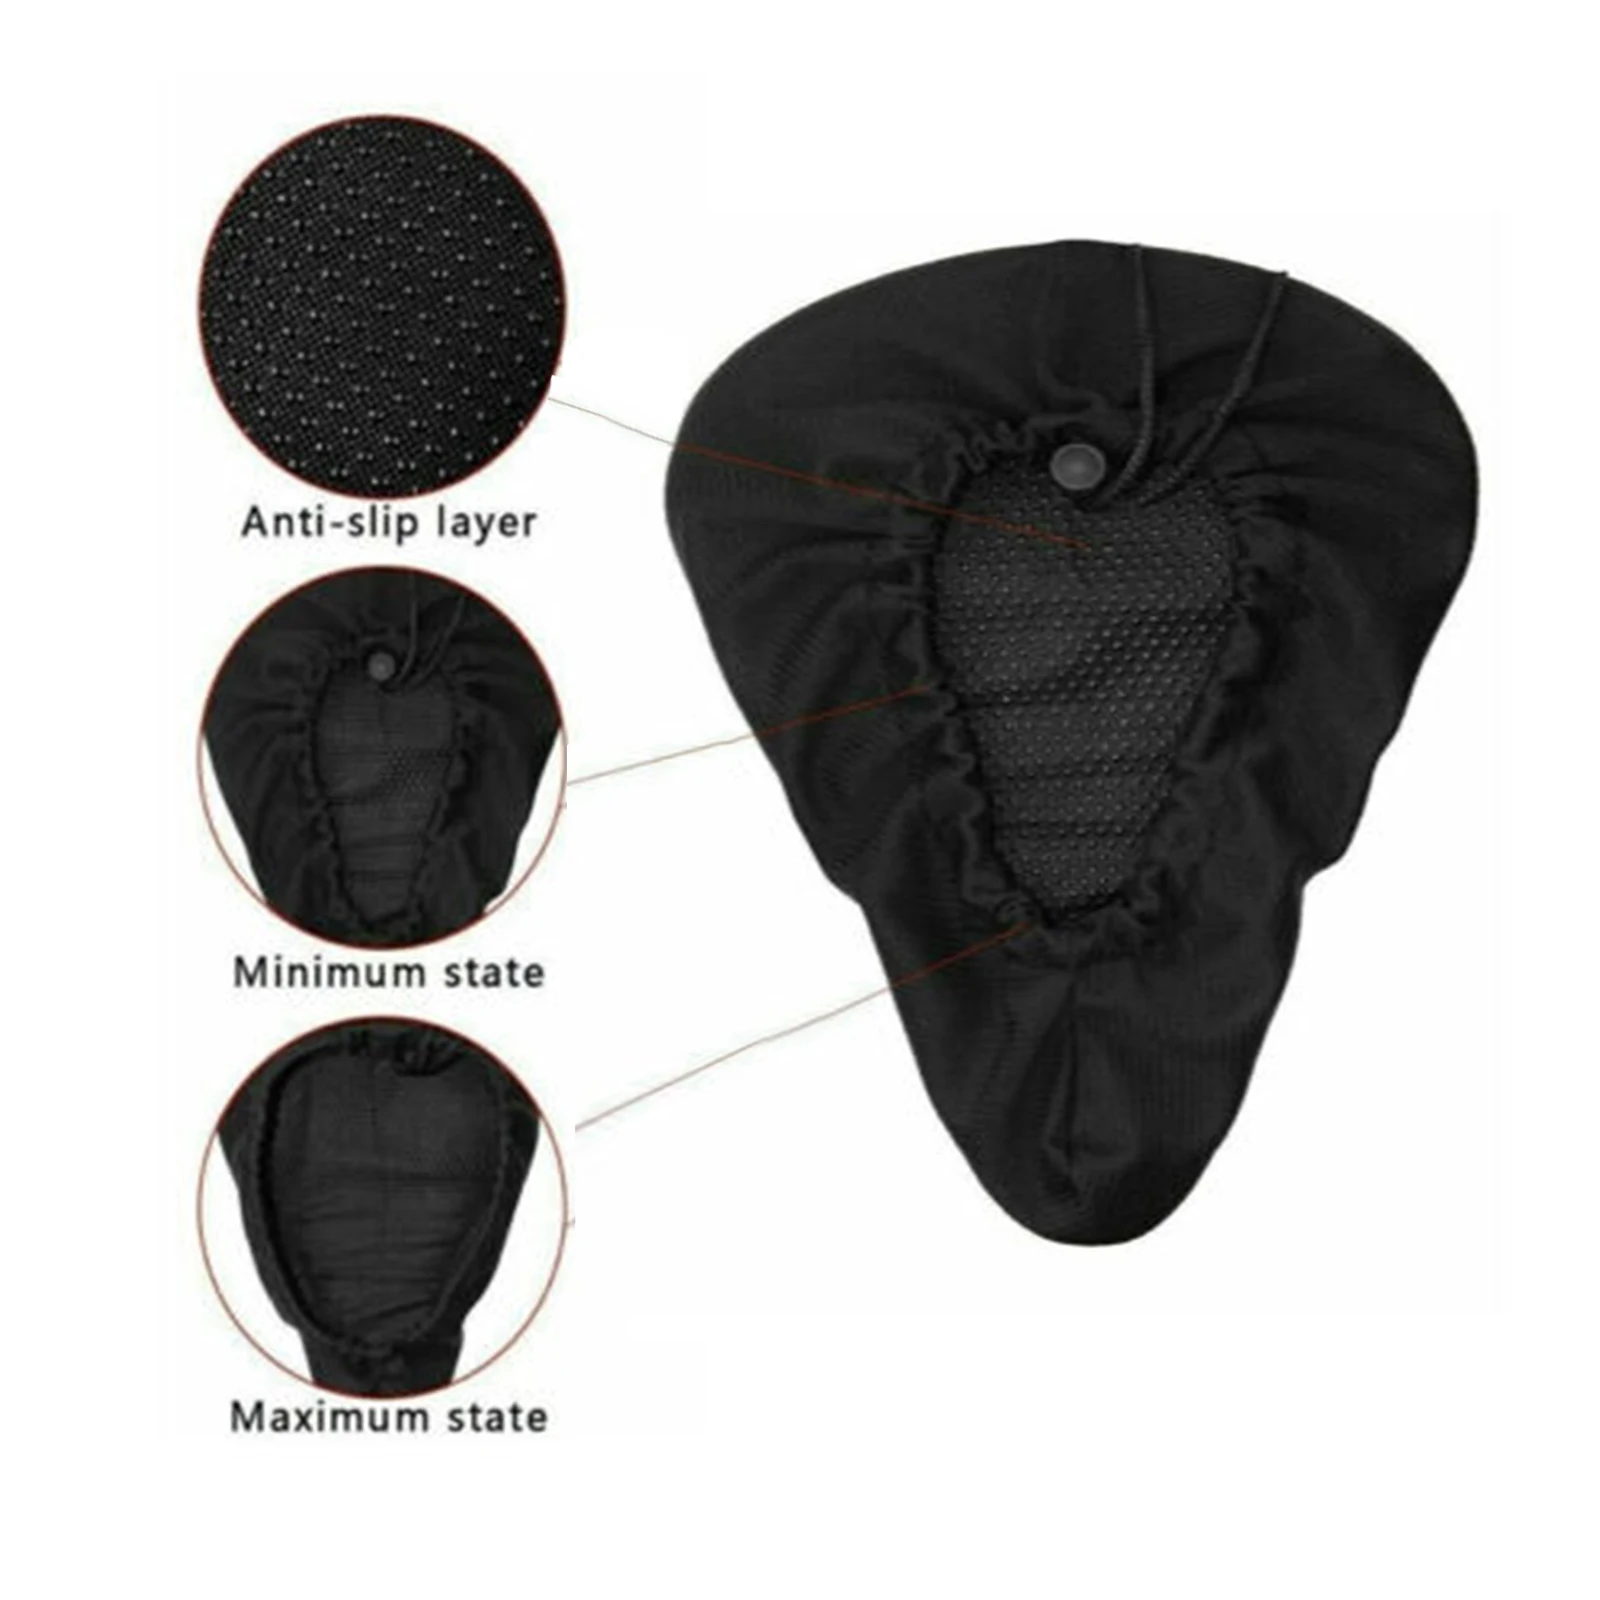 1pc Bike Saddle Cover Bicycle Cushion Seat Cover 3D Gel Saddle Pad Padded Soft Extra Comfort Inter Layer Fill With Silicone images - 6